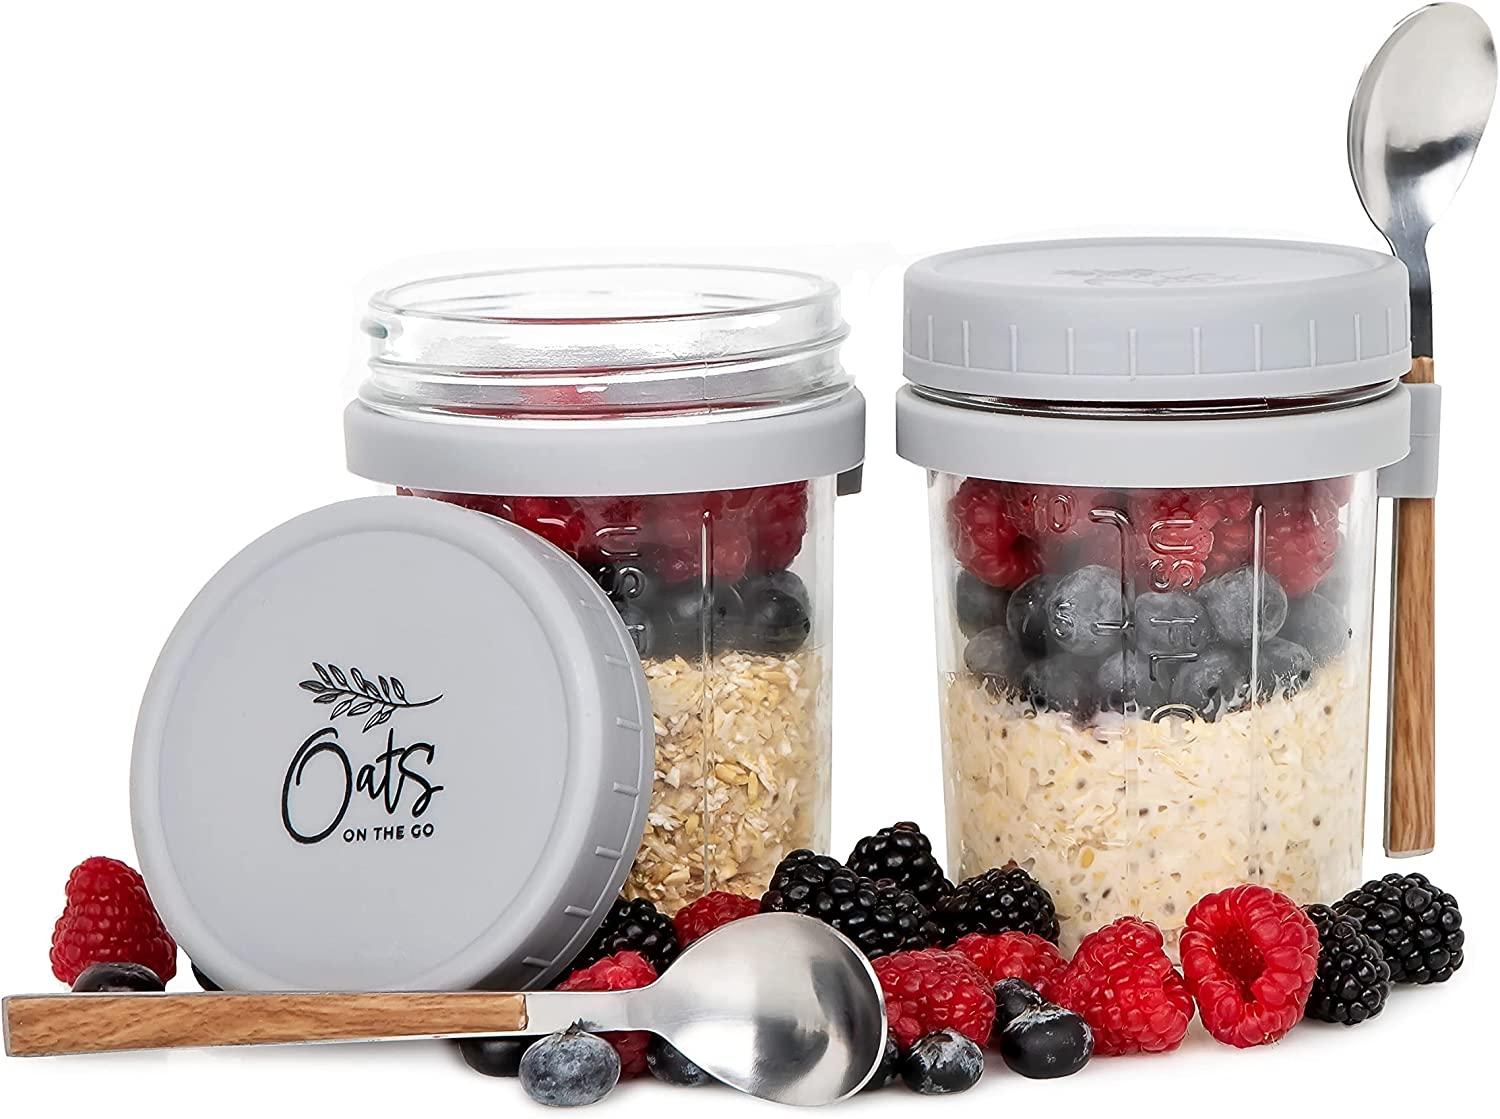 Xigugo Overnight Oats Container with Lid and Spoon, Overnight Oats